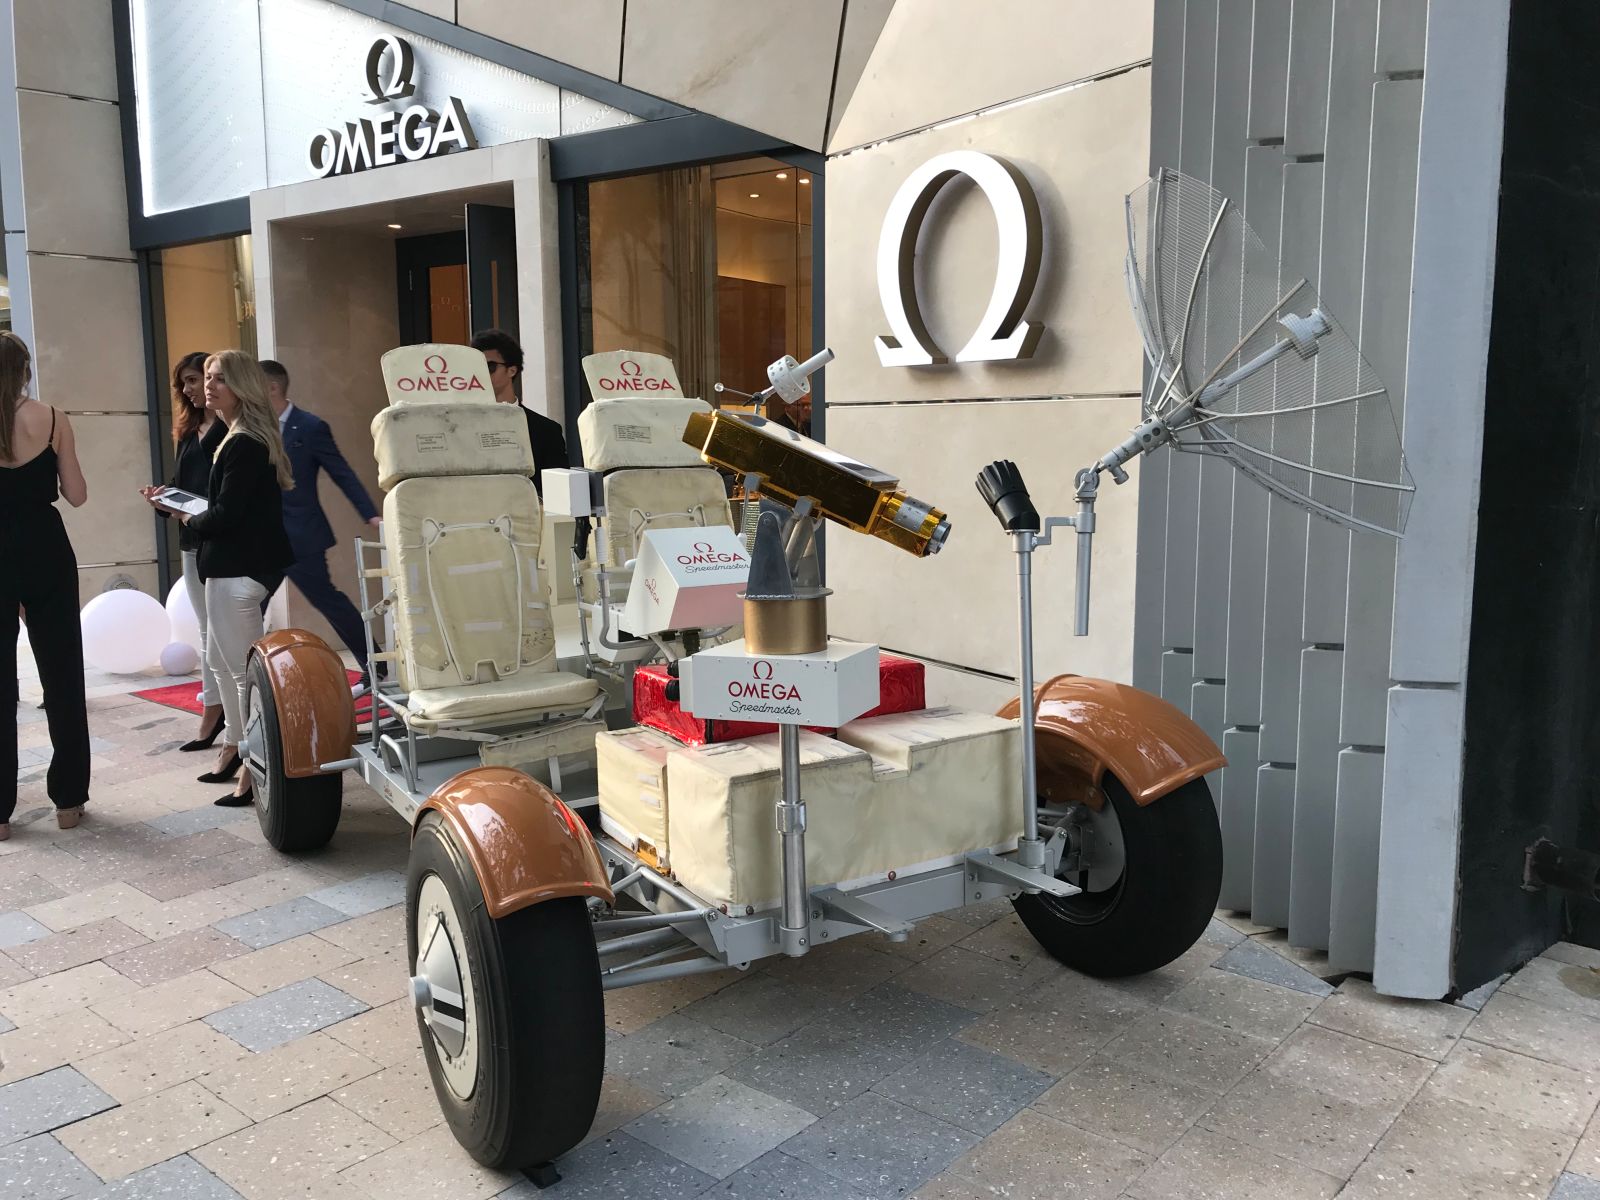 Omega “Moon Buggy” Outside of their boutique